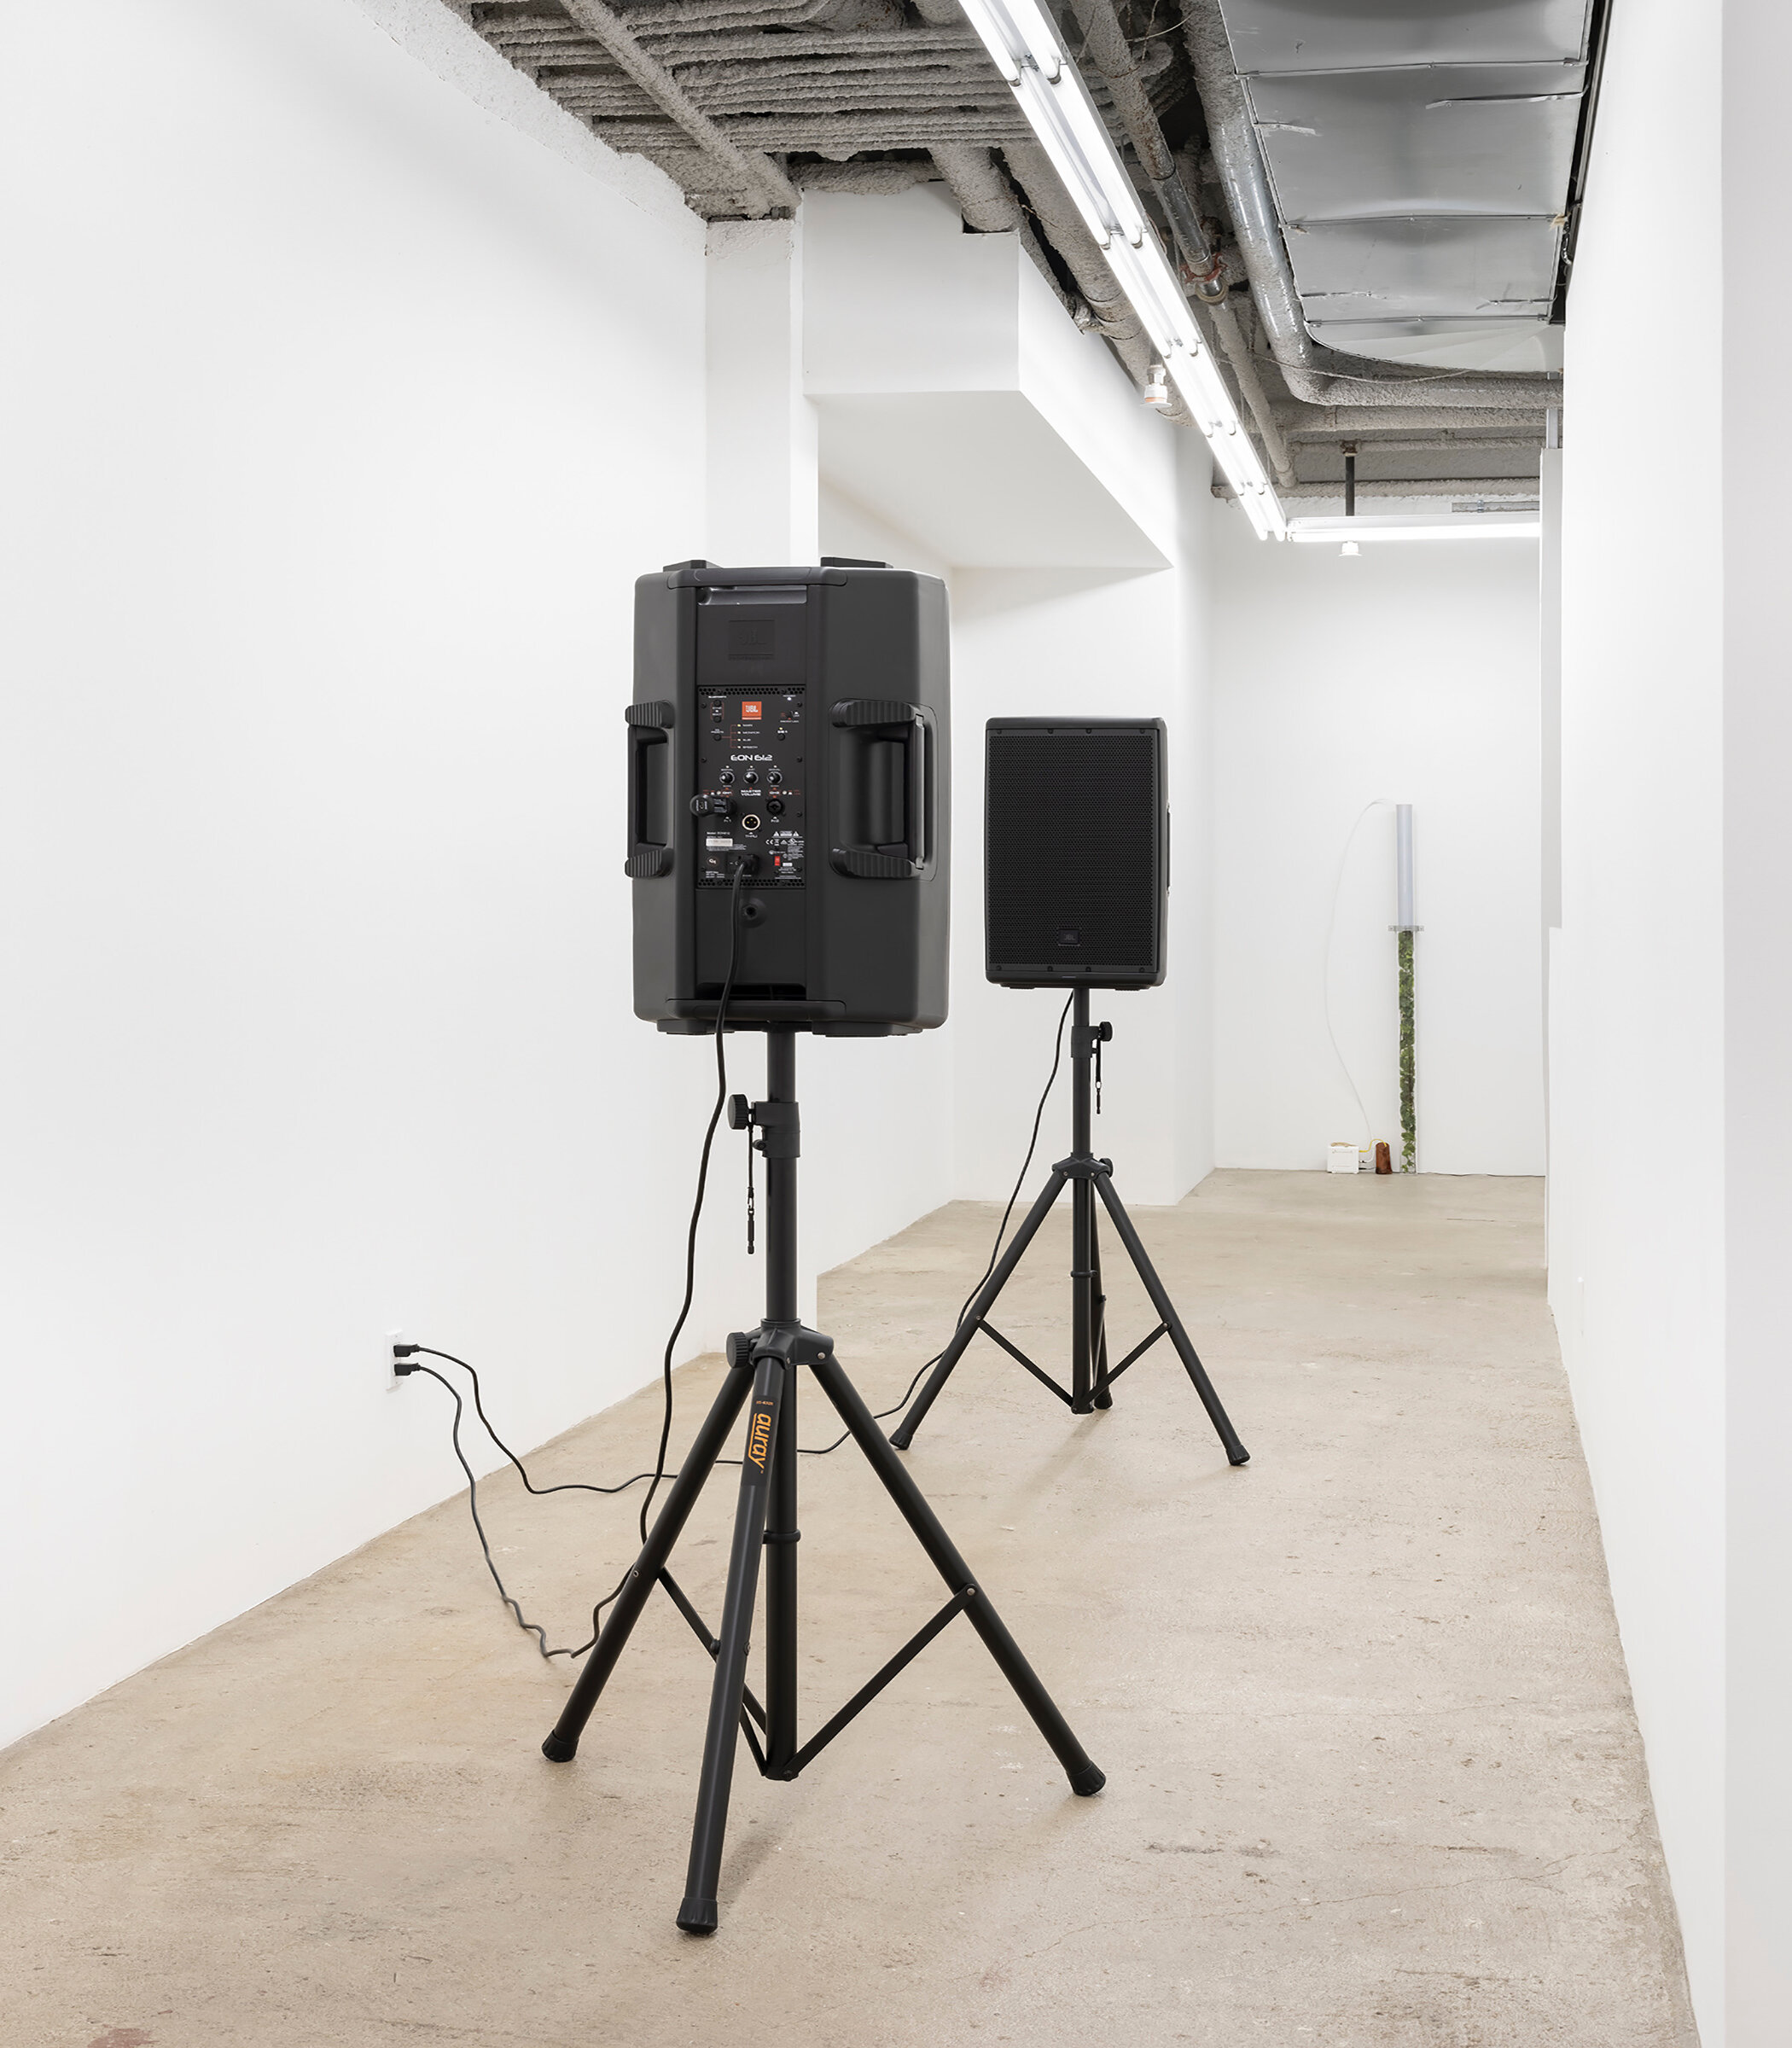  Connor McNicholas  Self-Isolation Loops , 2020 Audio file, speakers, tripods, cables, electricity  TRT: 34 minutes 